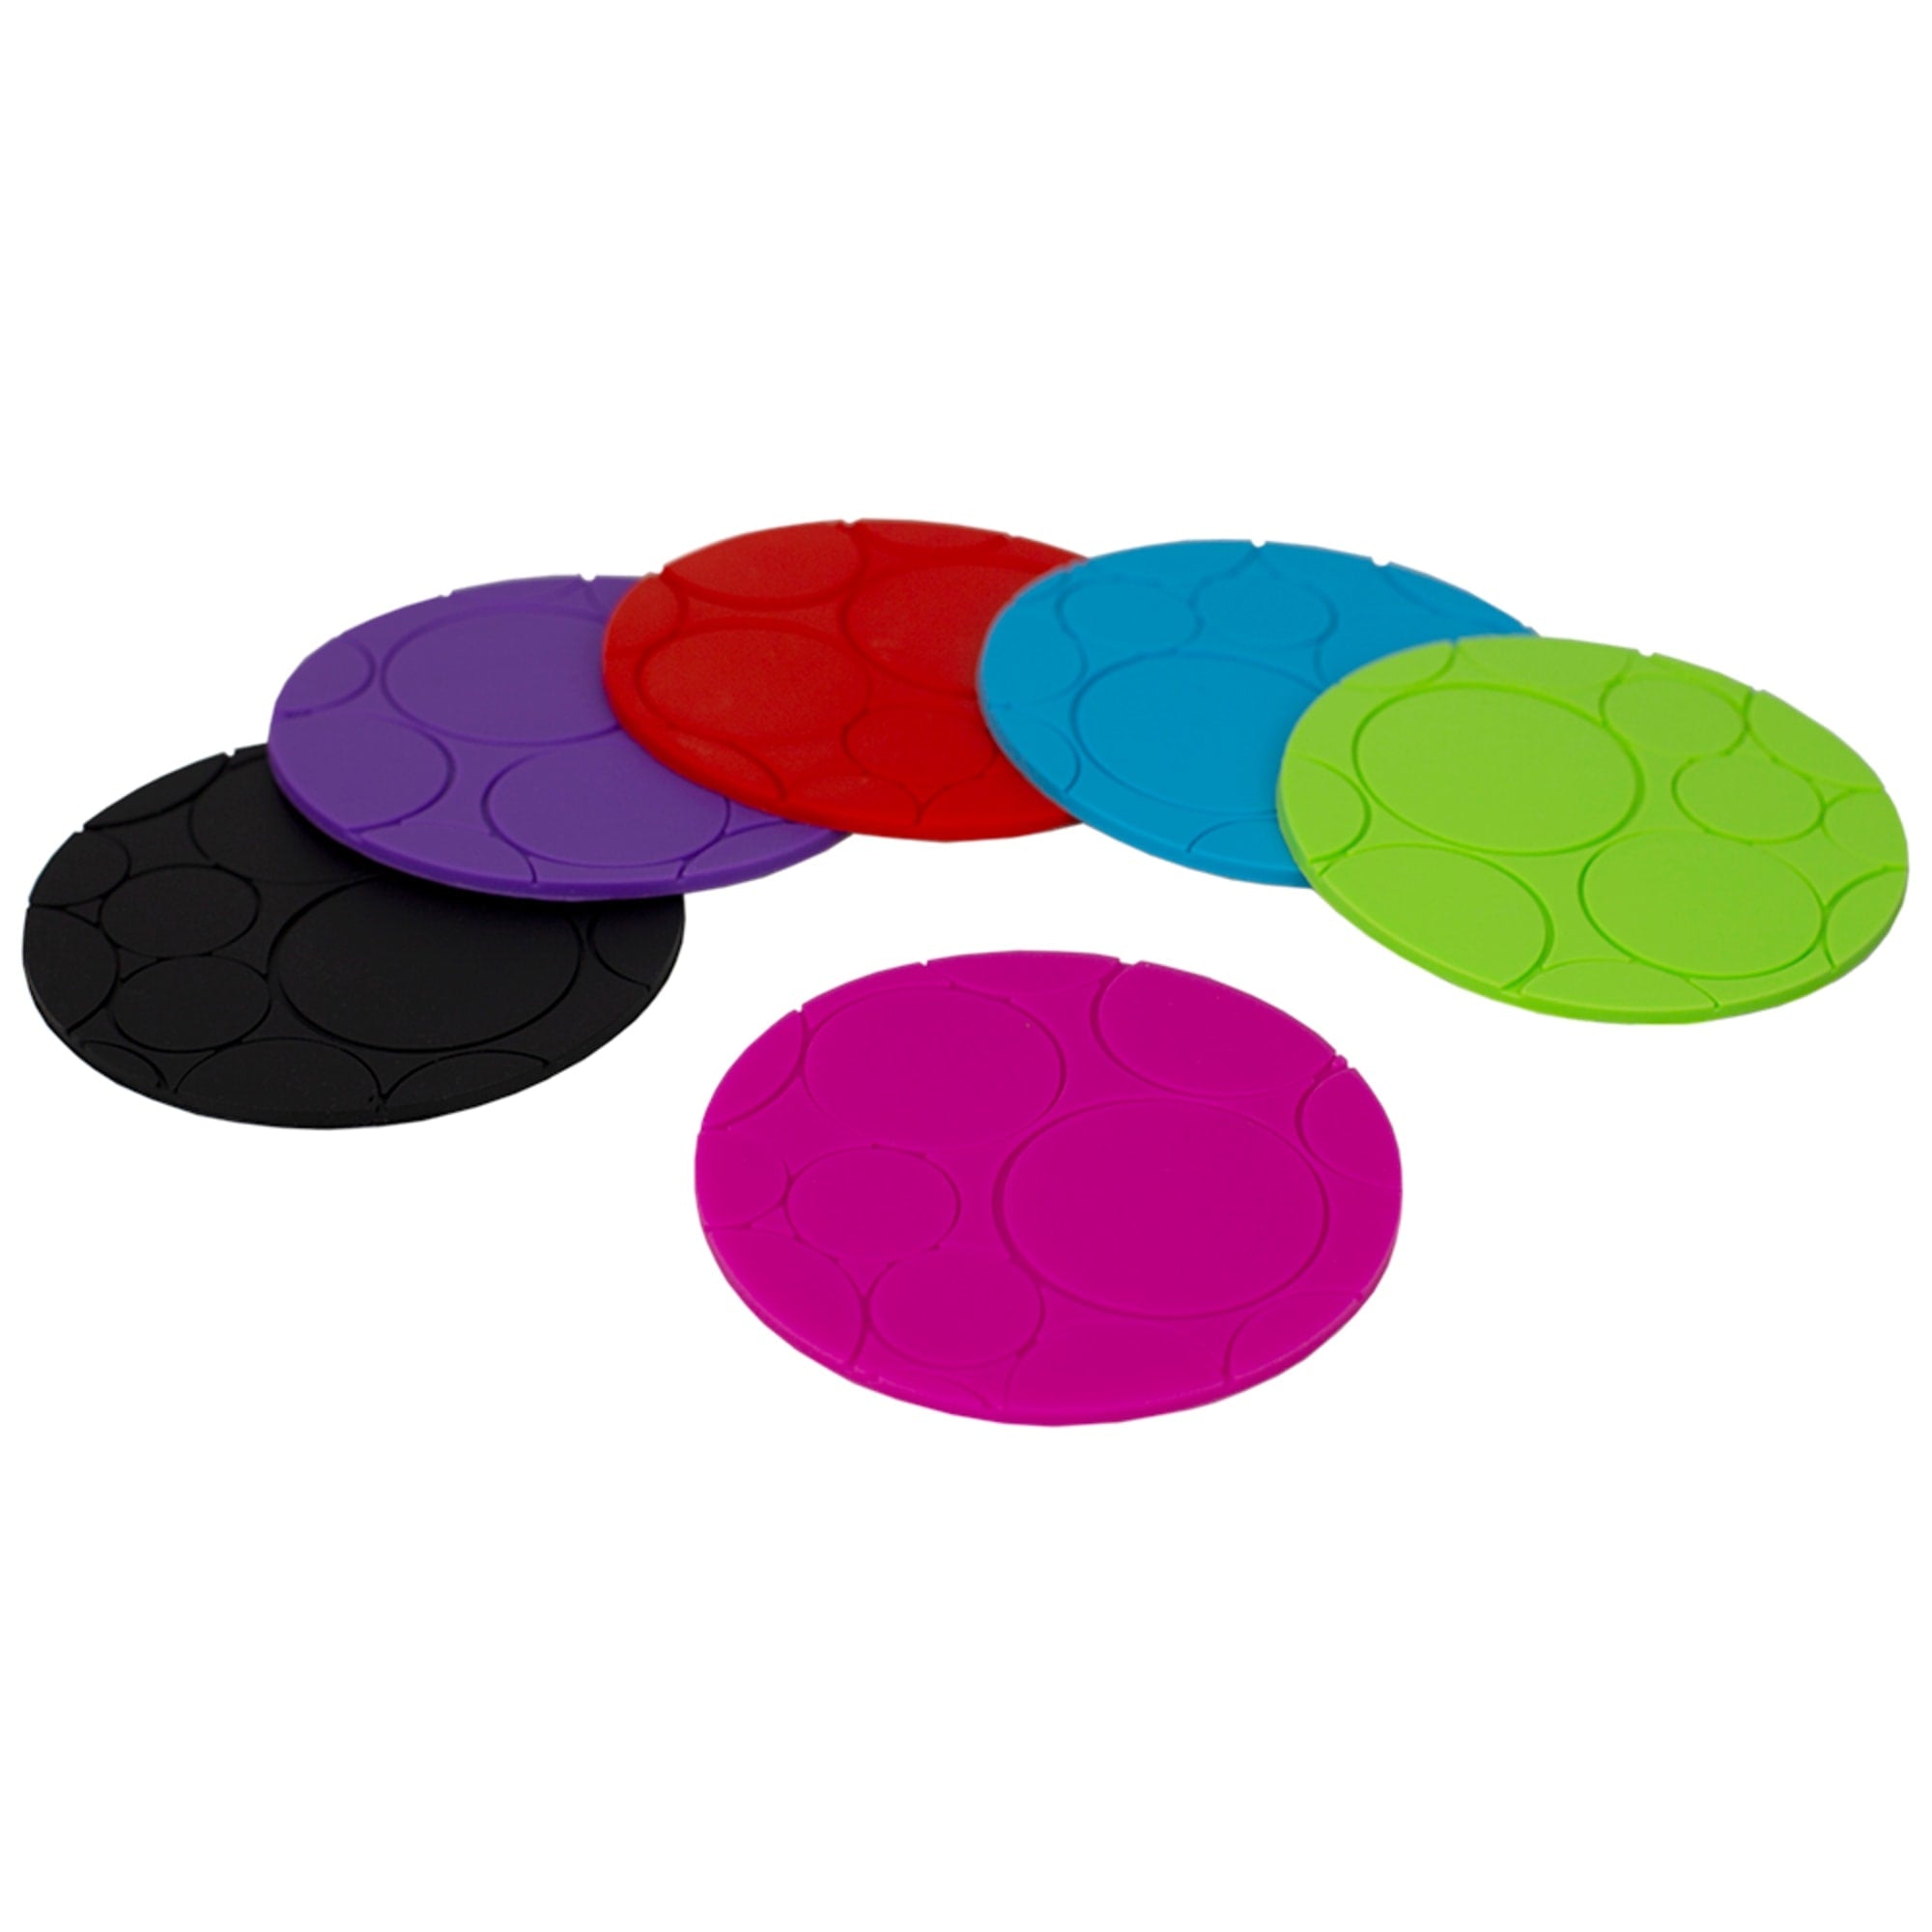 Home Basics Non-Slip Round Silicone Coasters, Multi-color $5.00 EACH, CASE PACK OF 48